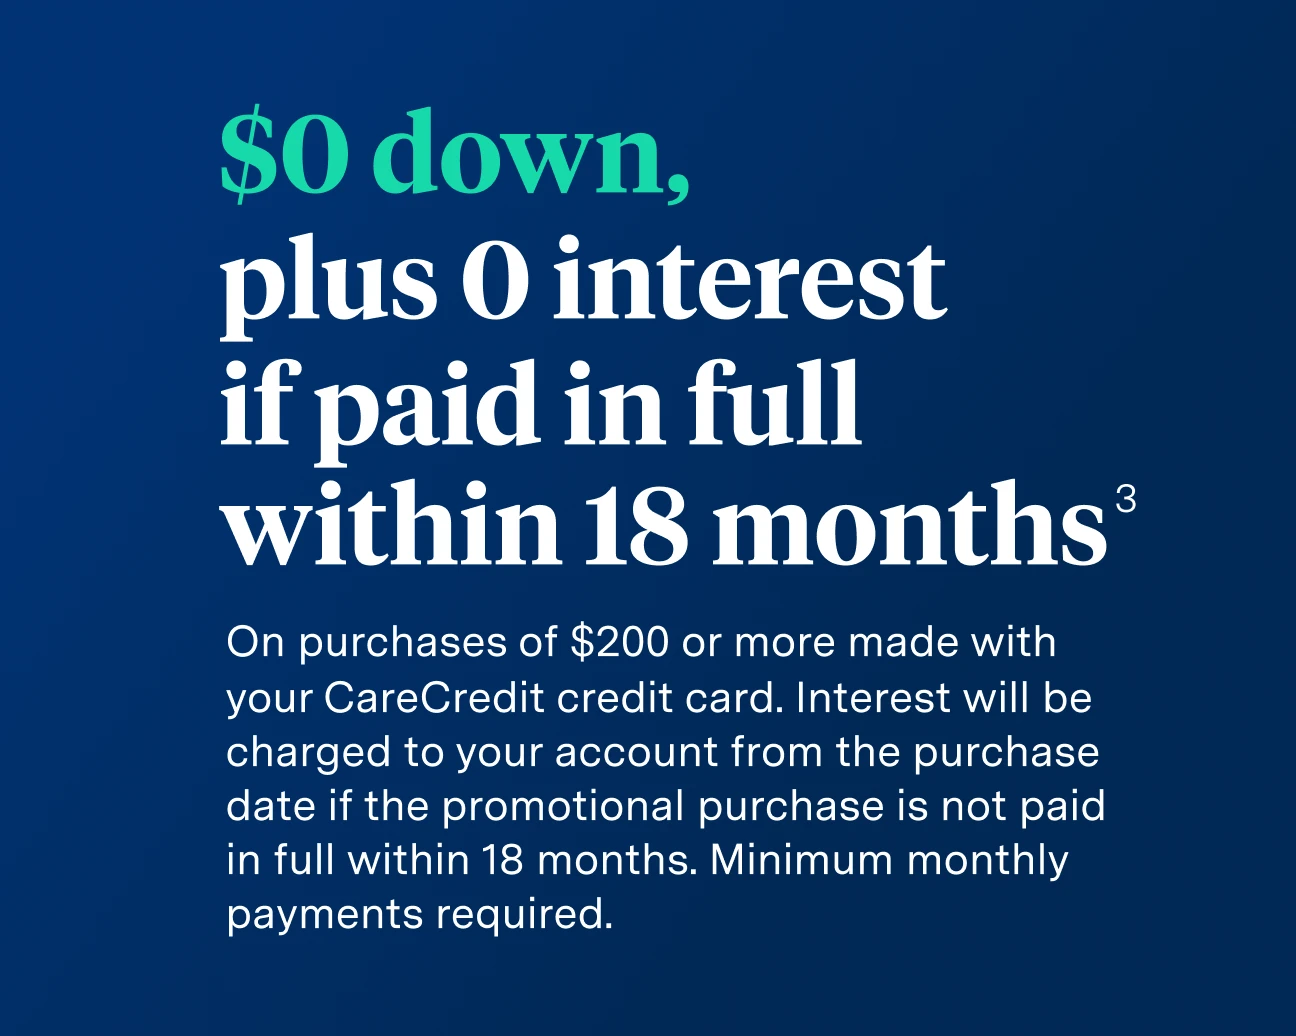 Image with words '0 down, plus 0 interest if paid in full within 18 months.
On purchase of $200 or more with your CareCredit credit card. Minimum monthly payments required. Interest will be charged to your account from the purchase data if the promotional balance is not paid in full within 18 months.'